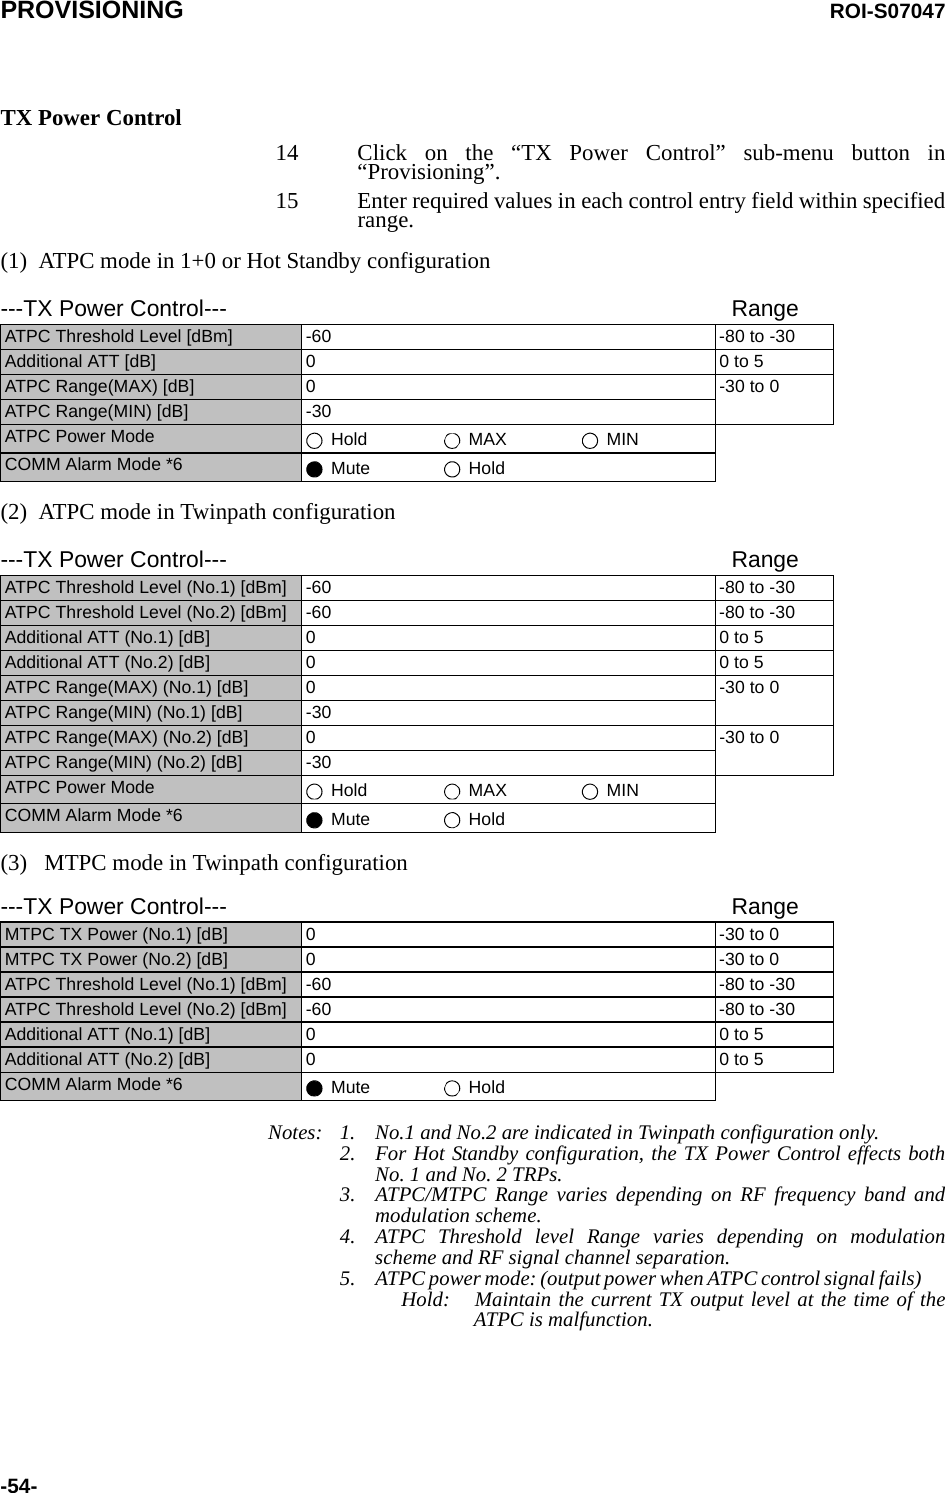 PROVISIONING ROI-S07047-54-TX Power Control14 Click on the “TX Power Control” sub-menu button in“Provisioning”.15 Enter required values in each control entry field within specifiedrange.(1)  ATPC mode in 1+0 or Hot Standby configuration(2)  ATPC mode in Twinpath configuration(3)   MTPC mode in Twinpath configuration Notes: 1. No.1 and No.2 are indicated in Twinpath configuration only.2. For Hot Standby configuration, the TX Power Control effects bothNo. 1 and No. 2 TRPs.3. ATPC/MTPC Range varies depending on RF frequency band andmodulation scheme.4. ATPC Threshold level Range varies depending on modulationscheme and RF signal channel separation.5. ATPC power mode: (output power when ATPC control signal fails)Hold: Maintain the current TX output level at the time of theATPC is malfunction.---TX Power Control--- RangeATPC Threshold Level [dBm] -60 -80 to -30Additional ATT [dB] 0 0 to 5ATPC Range(MAX) [dB] 0 -30 to 0ATPC Range(MIN) [dB] -30ATPC Power Mode  Hold  MAX   MINCOMM Alarm Mode *6  Mute  Hold---TX Power Control--- RangeATPC Threshold Level (No.1) [dBm] -60 -80 to -30ATPC Threshold Level (No.2) [dBm] -60 -80 to -30Additional ATT (No.1) [dB] 0 0 to 5Additional ATT (No.2) [dB] 0 0 to 5ATPC Range(MAX) (No.1) [dB] 0 -30 to 0ATPC Range(MIN) (No.1) [dB] -30ATPC Range(MAX) (No.2) [dB] 0 -30 to 0ATPC Range(MIN) (No.2) [dB] -30ATPC Power Mode  Hold  MAX  MINCOMM Alarm Mode *6  Mute  Hold---TX Power Control--- RangeMTPC TX Power (No.1) [dB] 0 -30 to 0MTPC TX Power (No.2) [dB] 0 -30 to 0ATPC Threshold Level (No.1) [dBm] -60 -80 to -30ATPC Threshold Level (No.2) [dBm] -60 -80 to -30Additional ATT (No.1) [dB] 0 0 to 5Additional ATT (No.2) [dB] 0 0 to 5COMM Alarm Mode *6  Mute  Hold